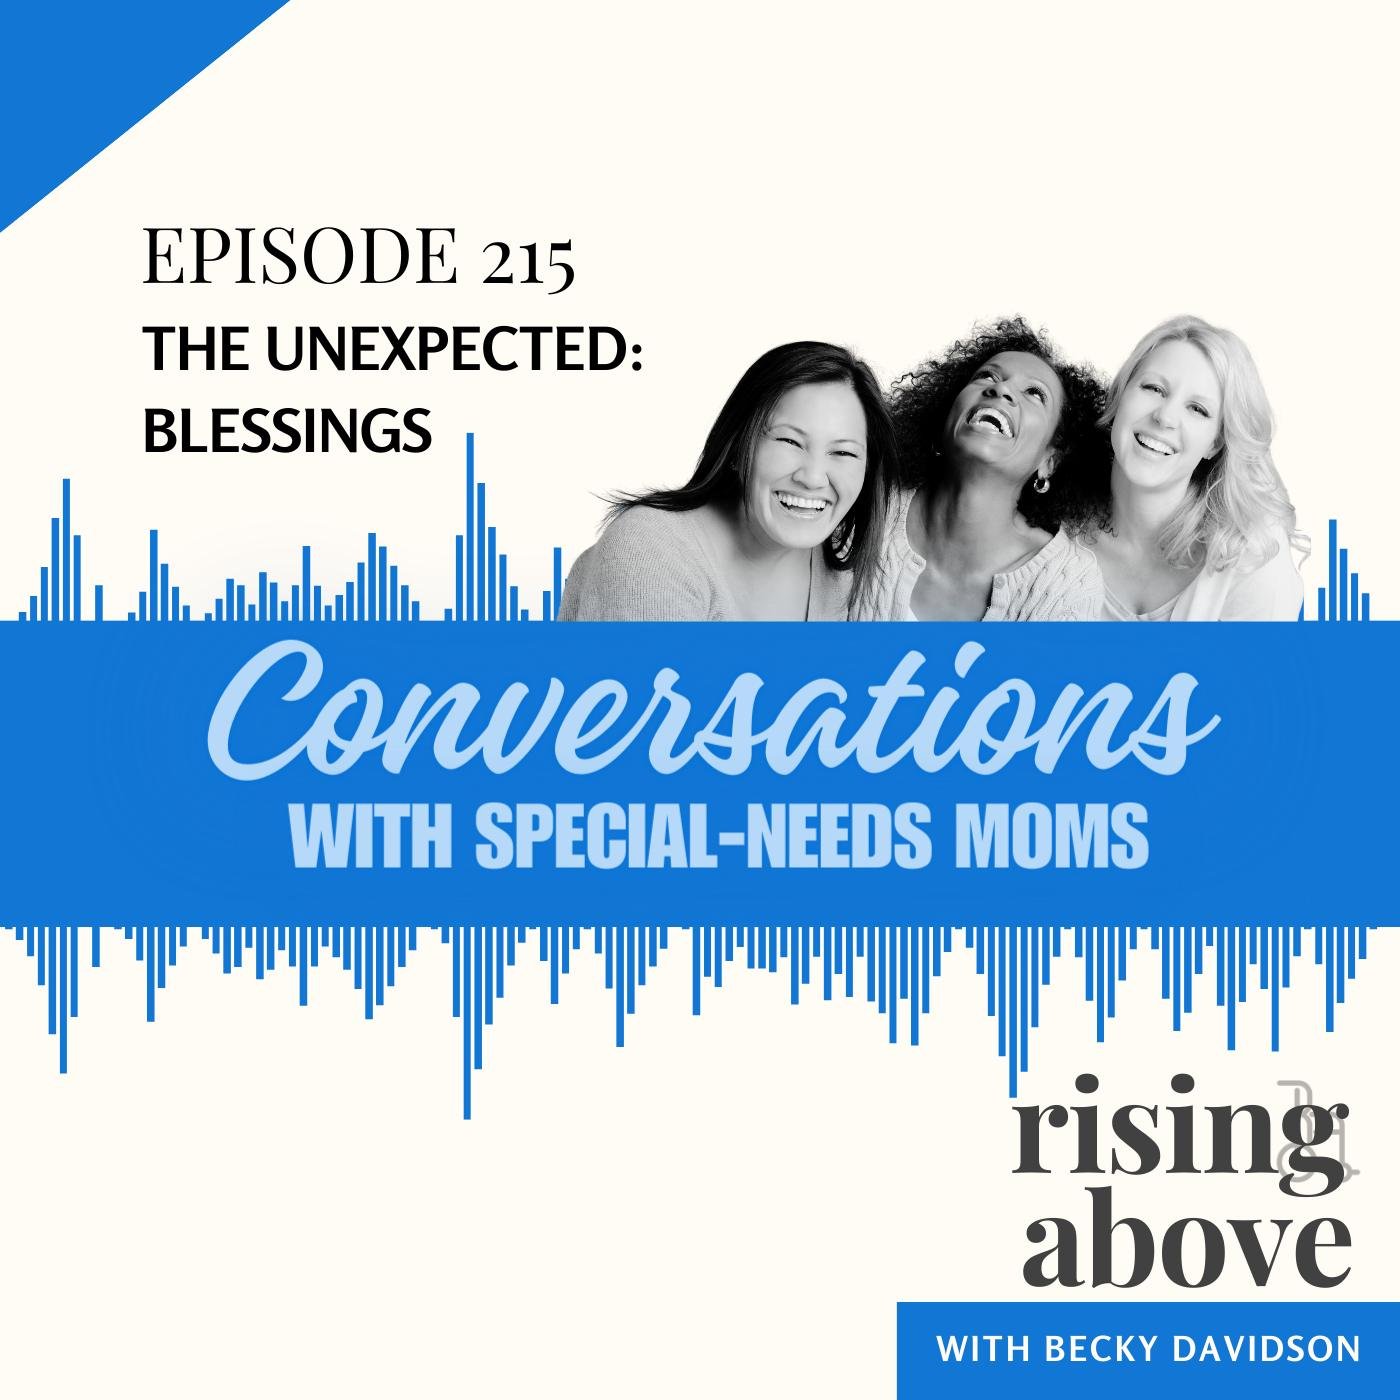 Today, we wrap up &quot;The Unexpected&quot; podcast series with a Conversation episode! Lori Chatman, Susan Lomax, and Cassandra Kemp join us to chat about the Unexpected Blessings they've found along the special-needs parenting journey. 💙Be sure y